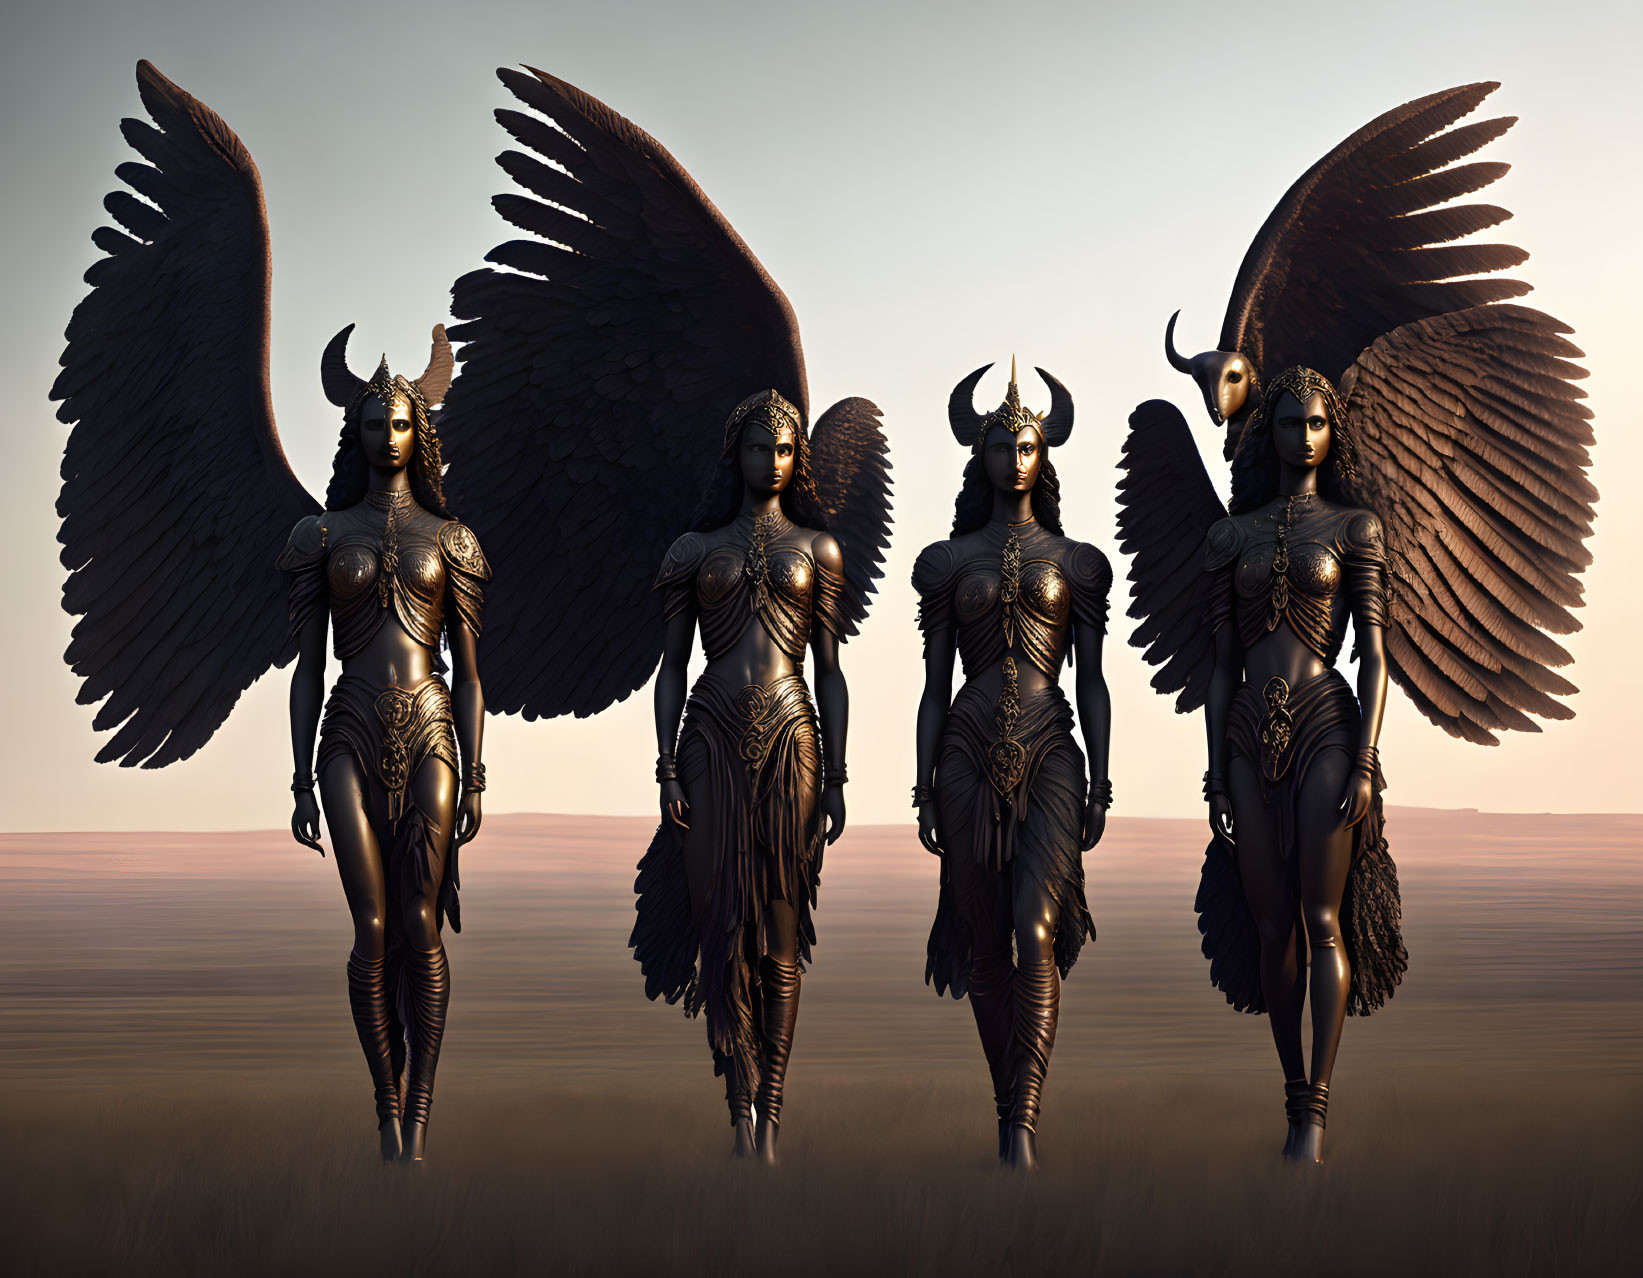 Four Female Figures with Horns and Dark Wings in Desert Landscape at Dawn or Dusk